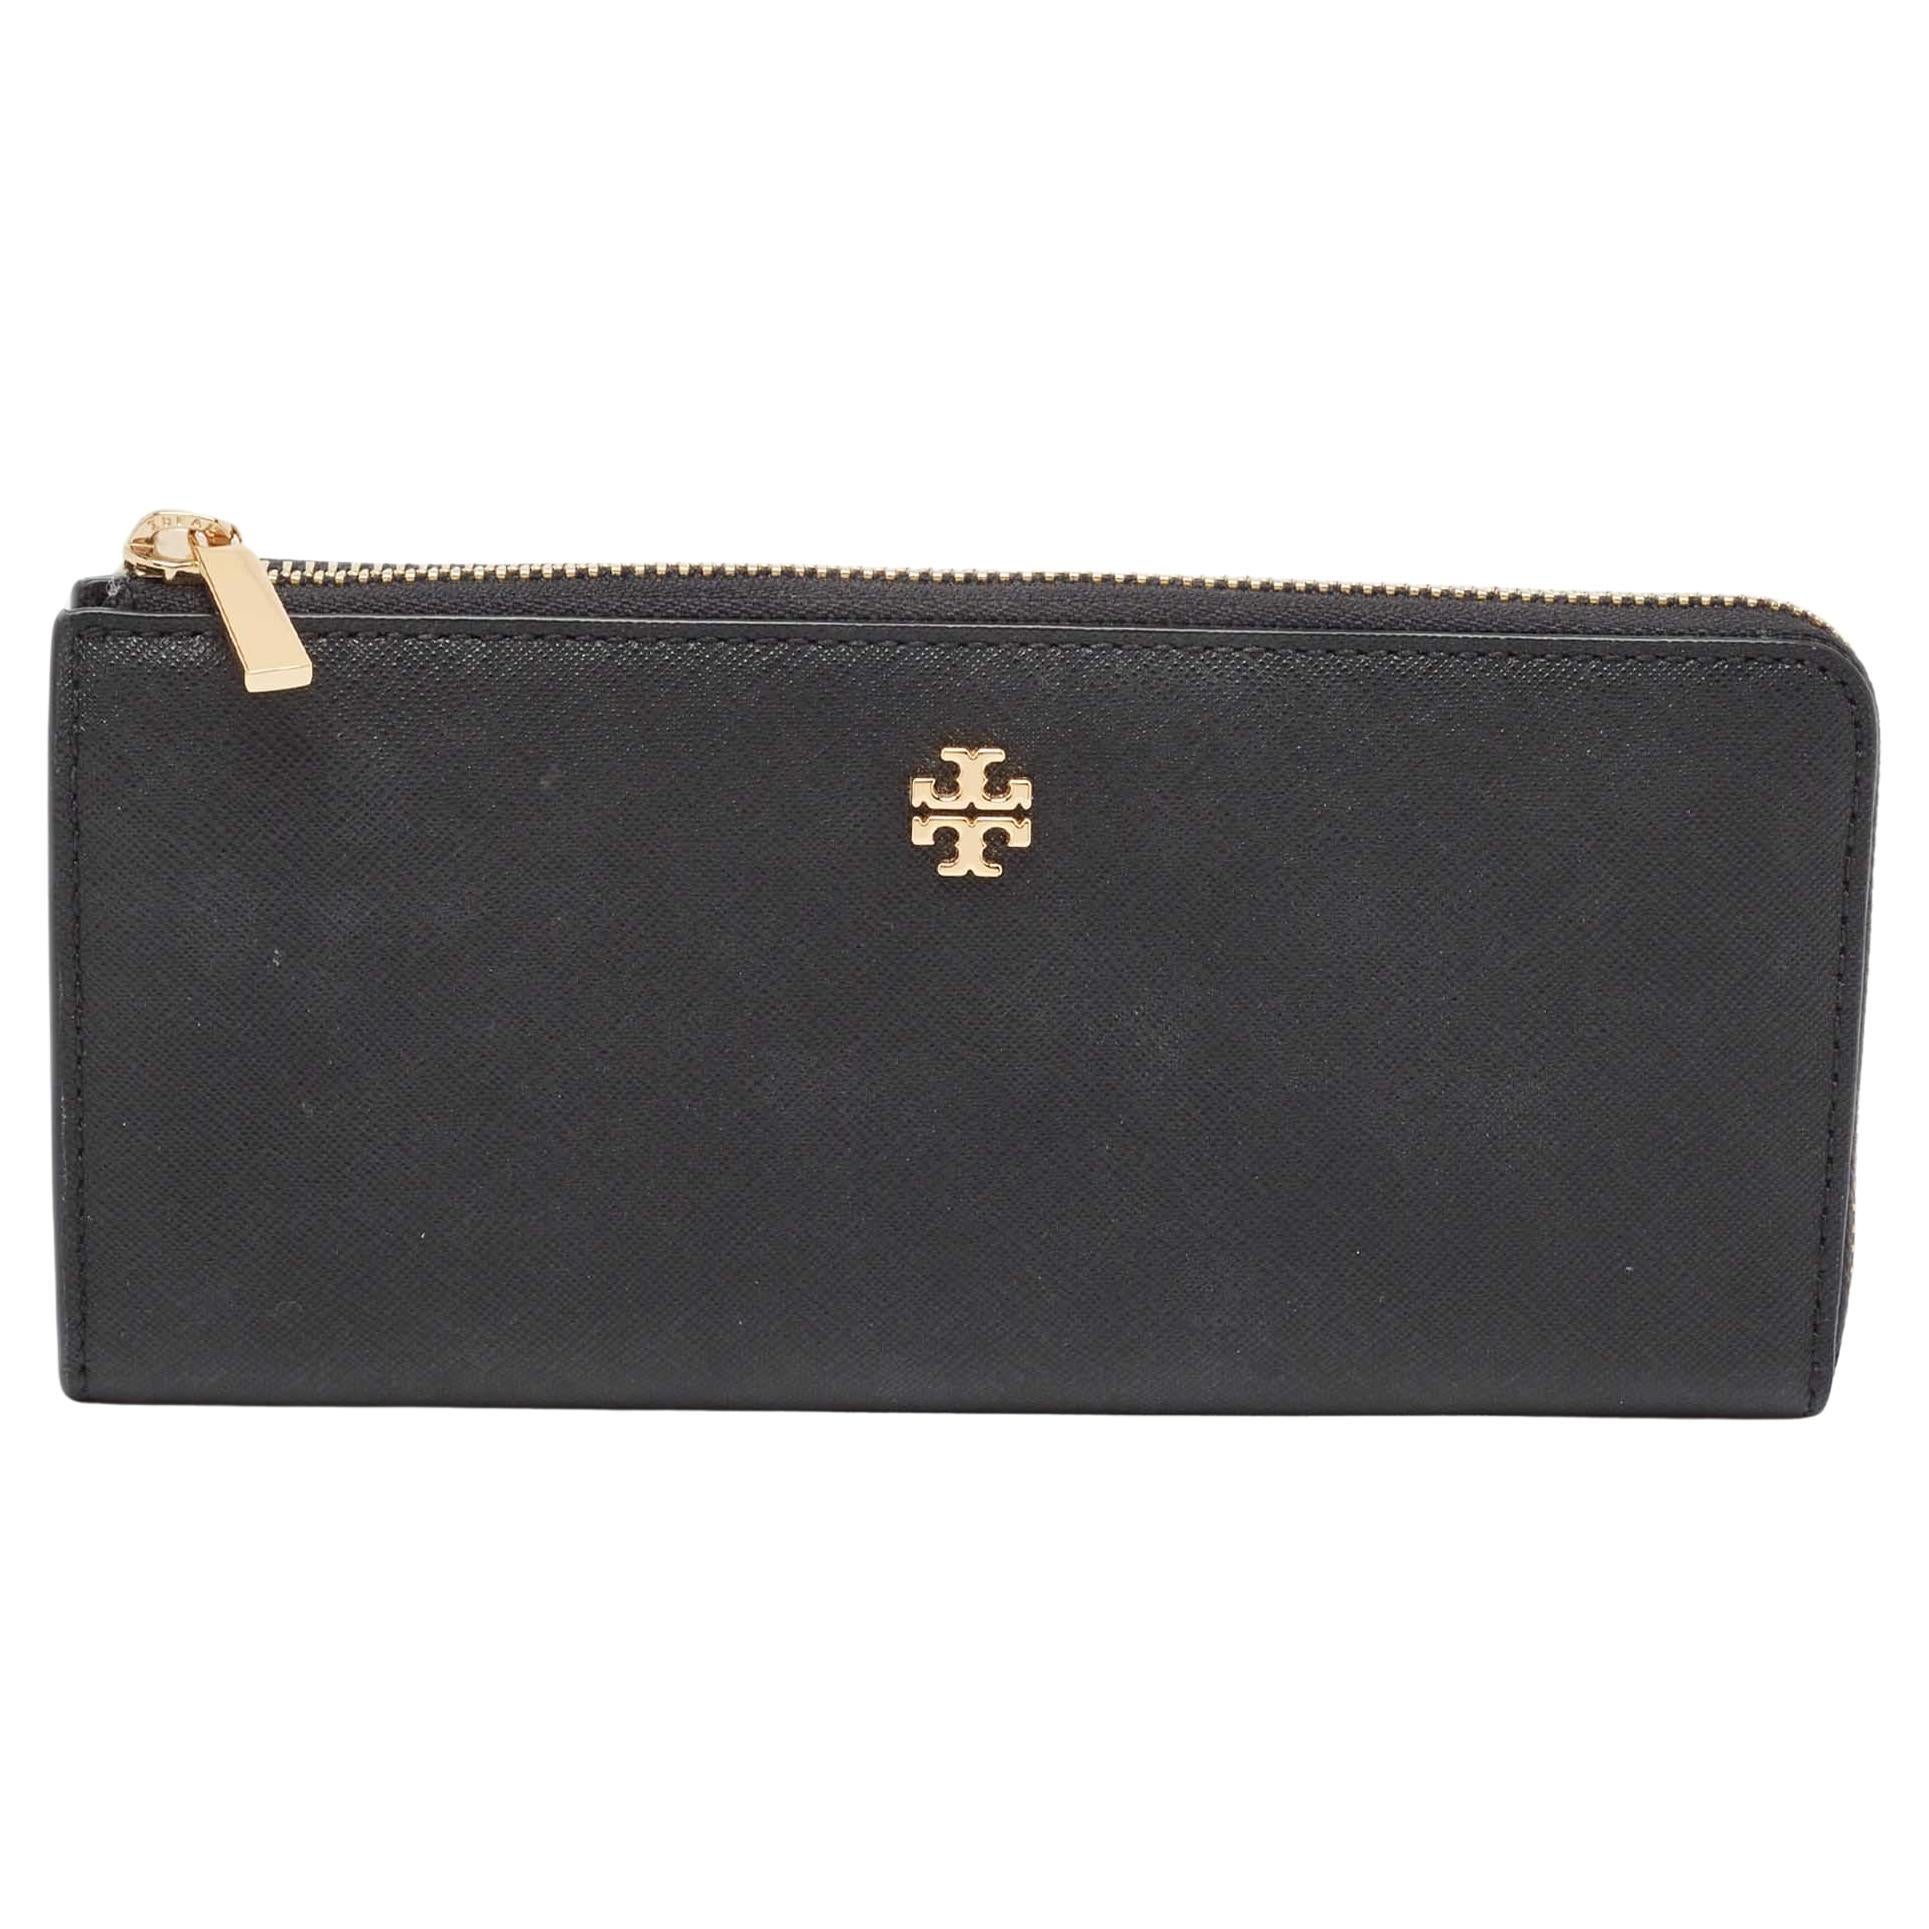 Tory Burch Black Leather Robinson Flap Continental Wallet For Sale